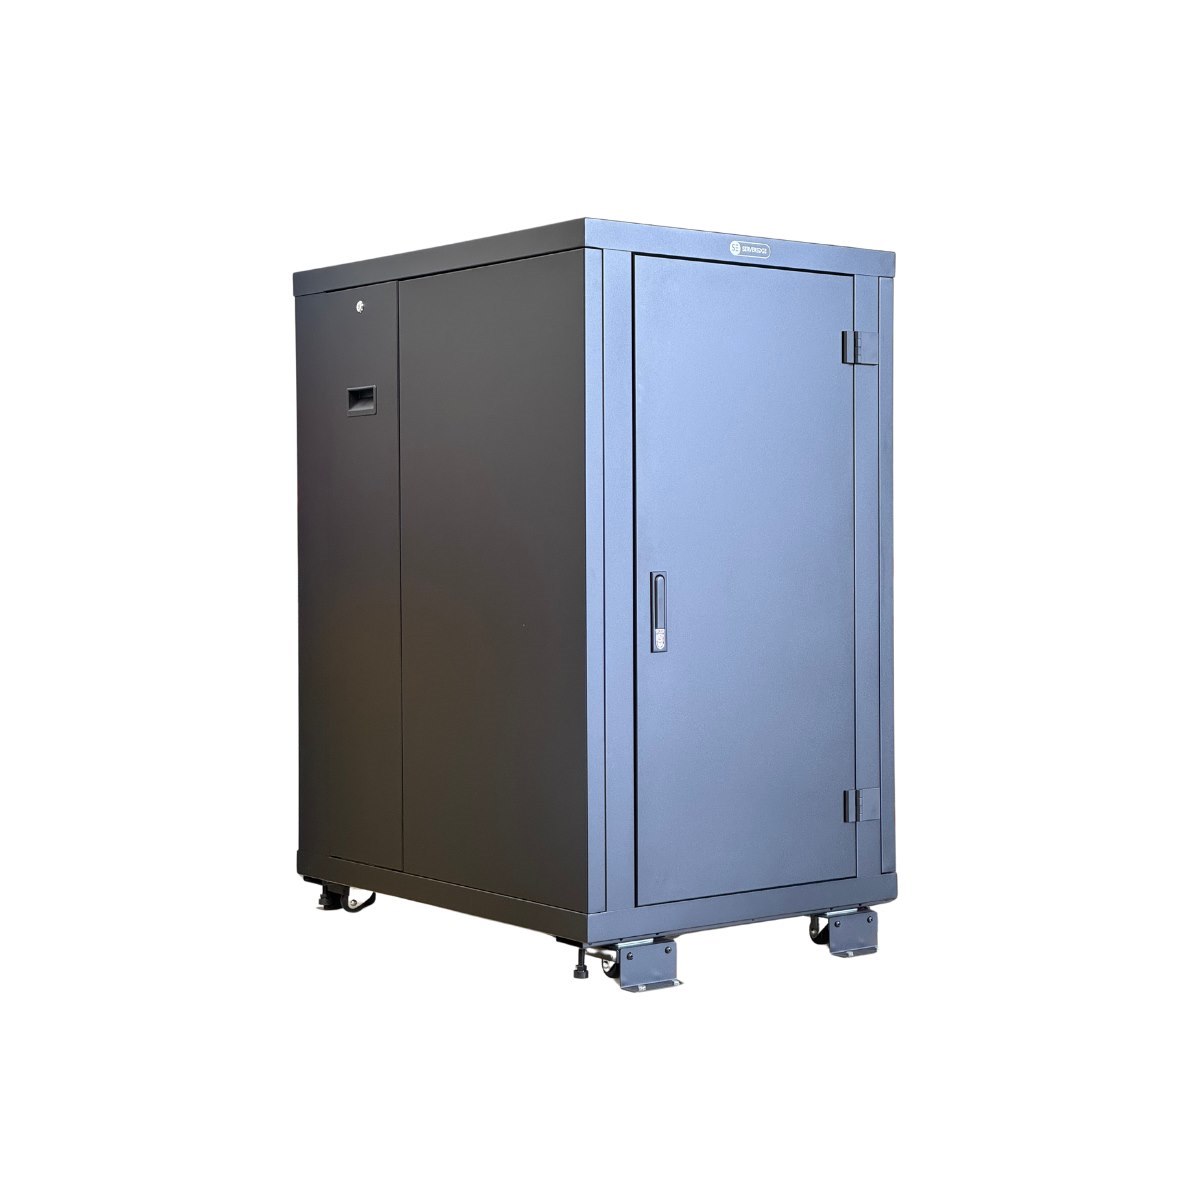 Serveredge 24Ru 750W X 1050D *Acoustic* Fully Assembled Premium Free Standing CabinetIncludes:* Front Metal Door .* 1CM Sound Emitting Isolation Material Covers All Doors And Panels With Double Skins